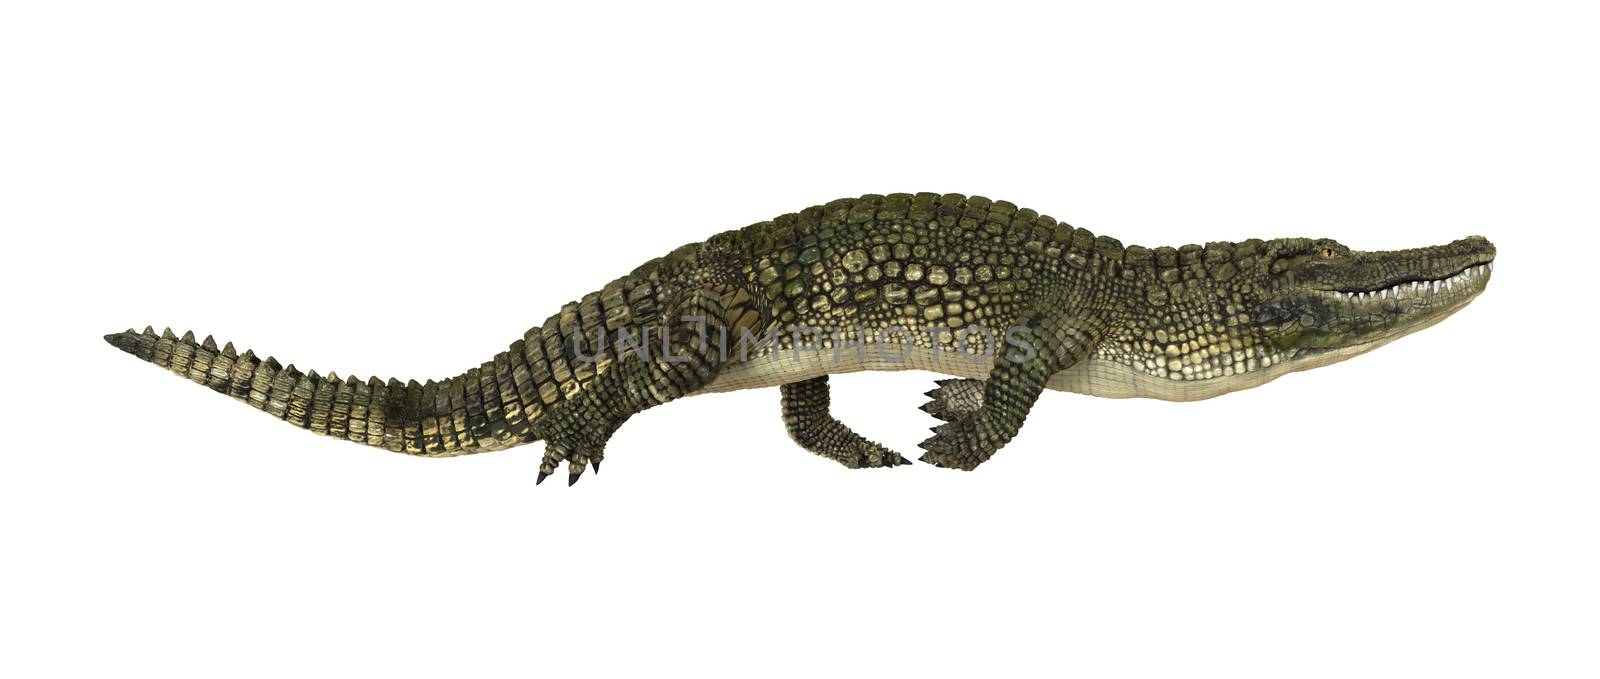 3D digital render of an American alligator isolated on white background